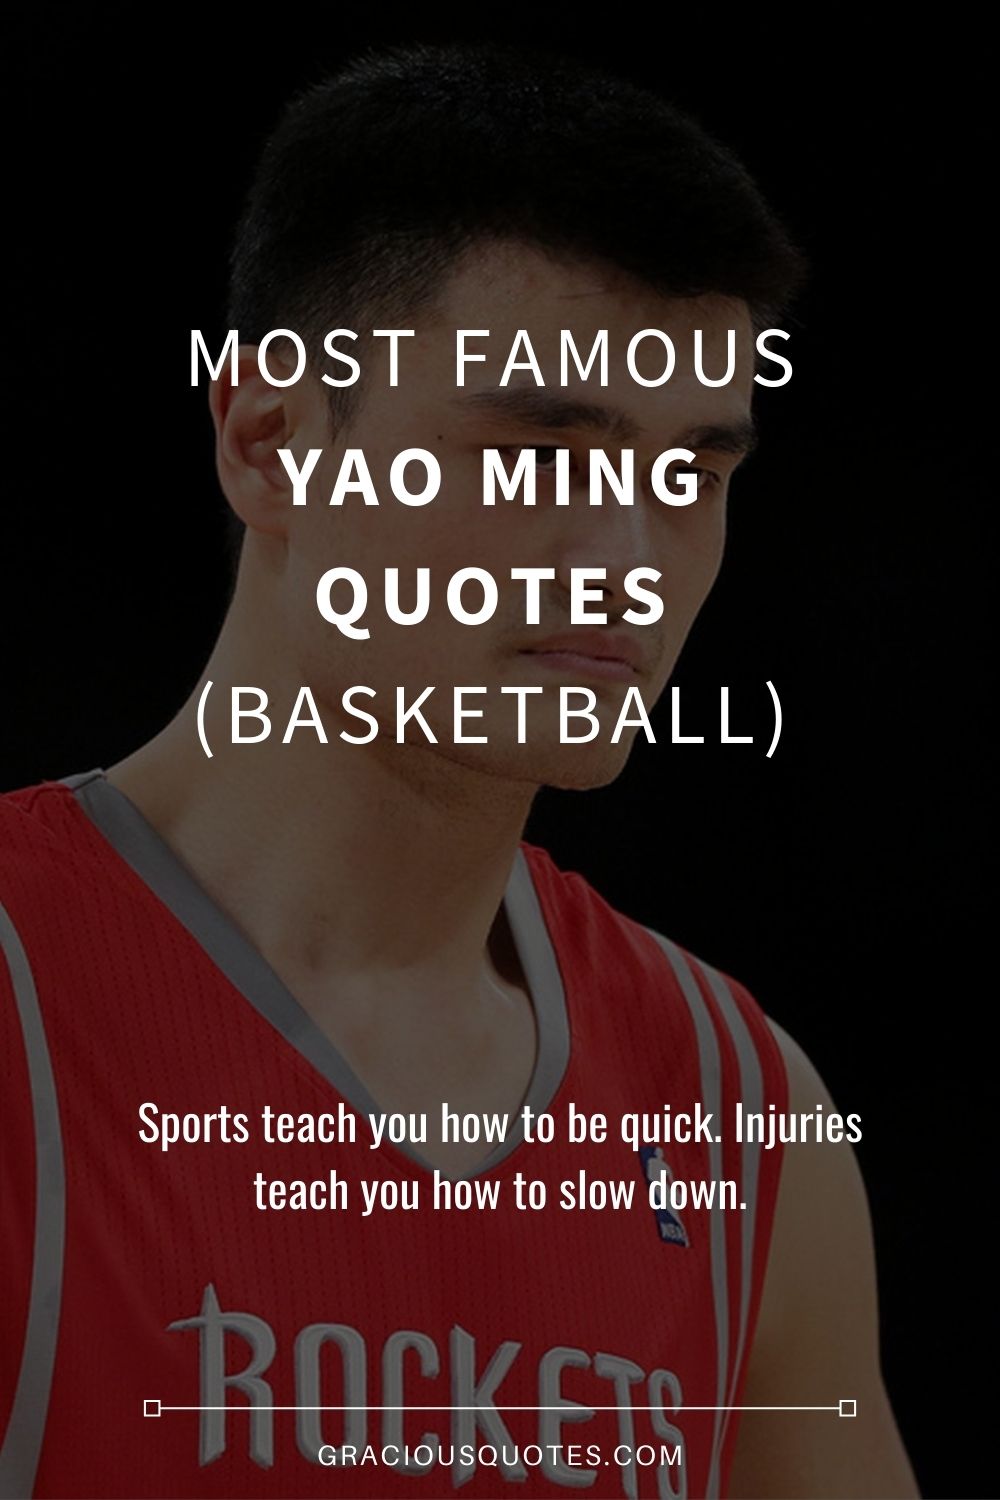 Most Famous Yao Ming Quotes (BASKETBALL) - Gracious Quotes